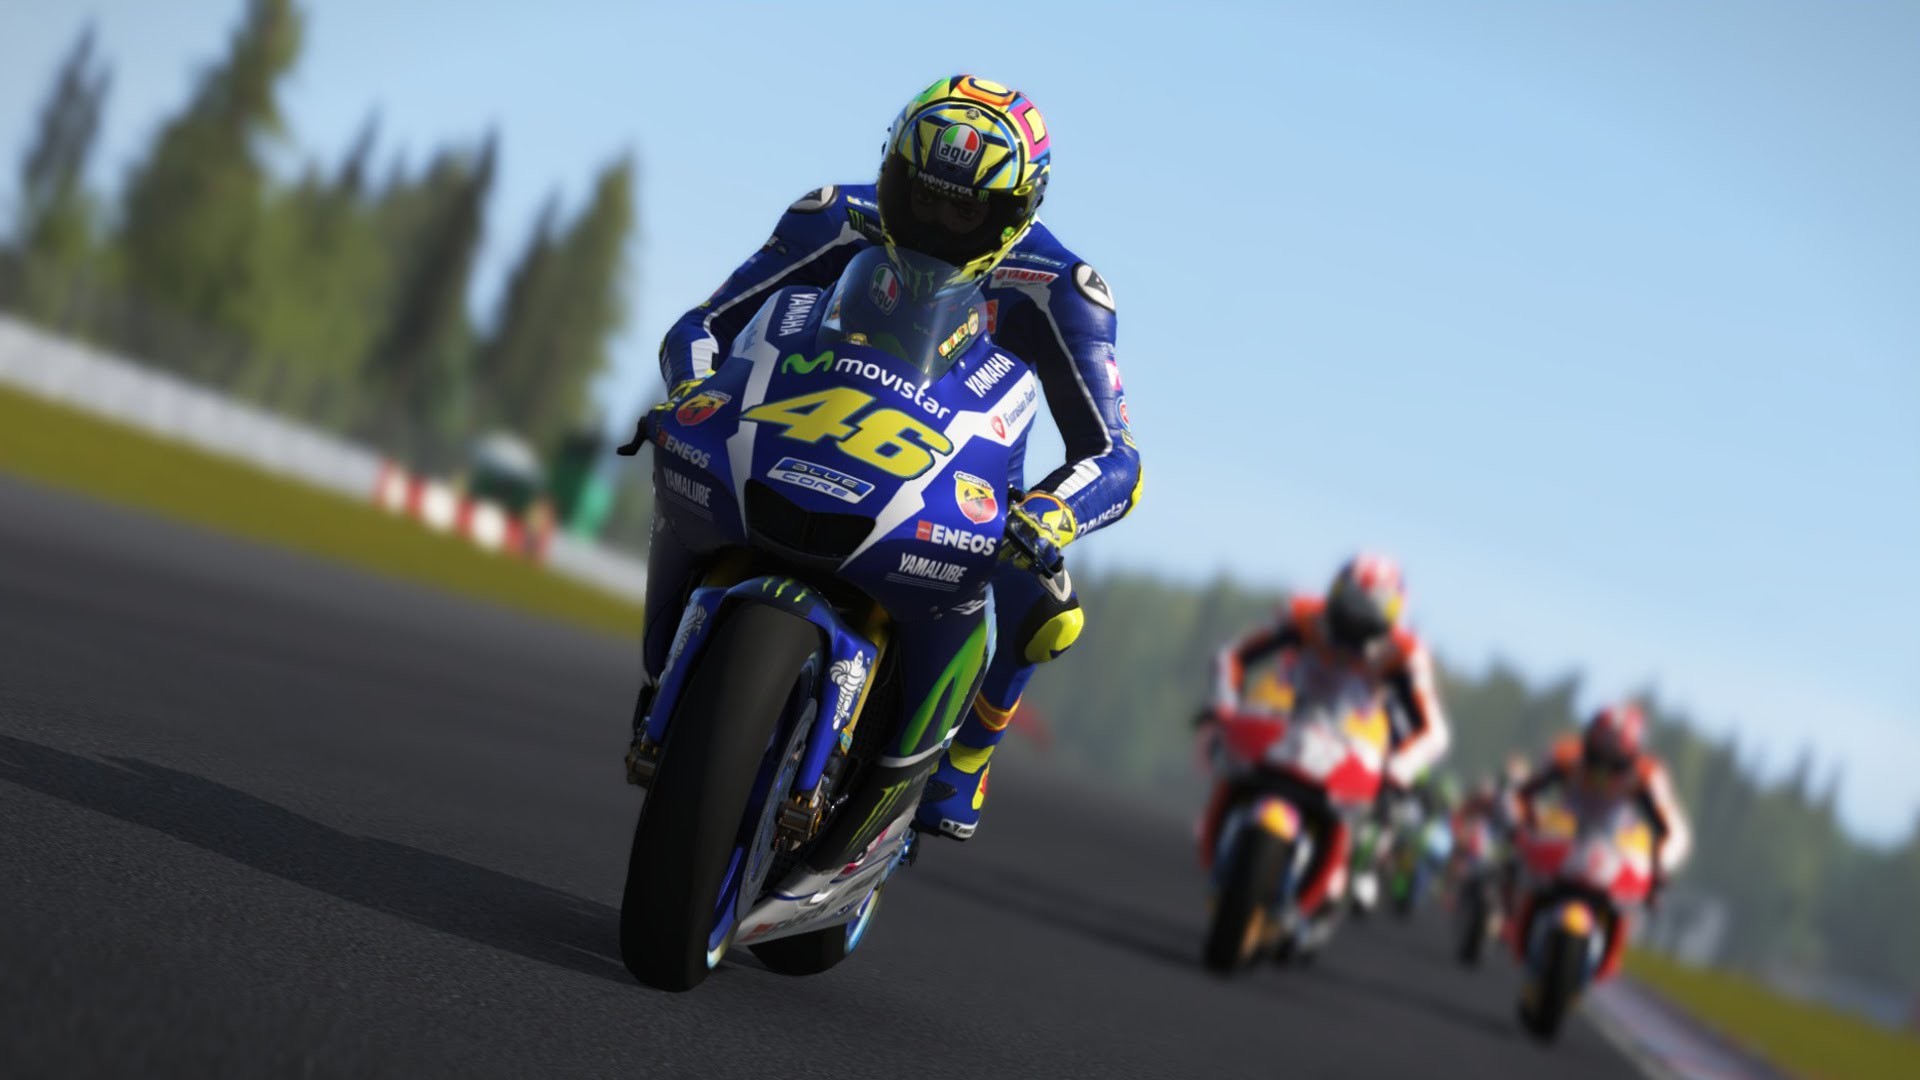 Valentino Rossi Wallpaper Collection 498500 Wallpaper Valentino Rossi 35 Wallpapers Adorable Wallpapers Desktop Pinterest Valentino rossi and other